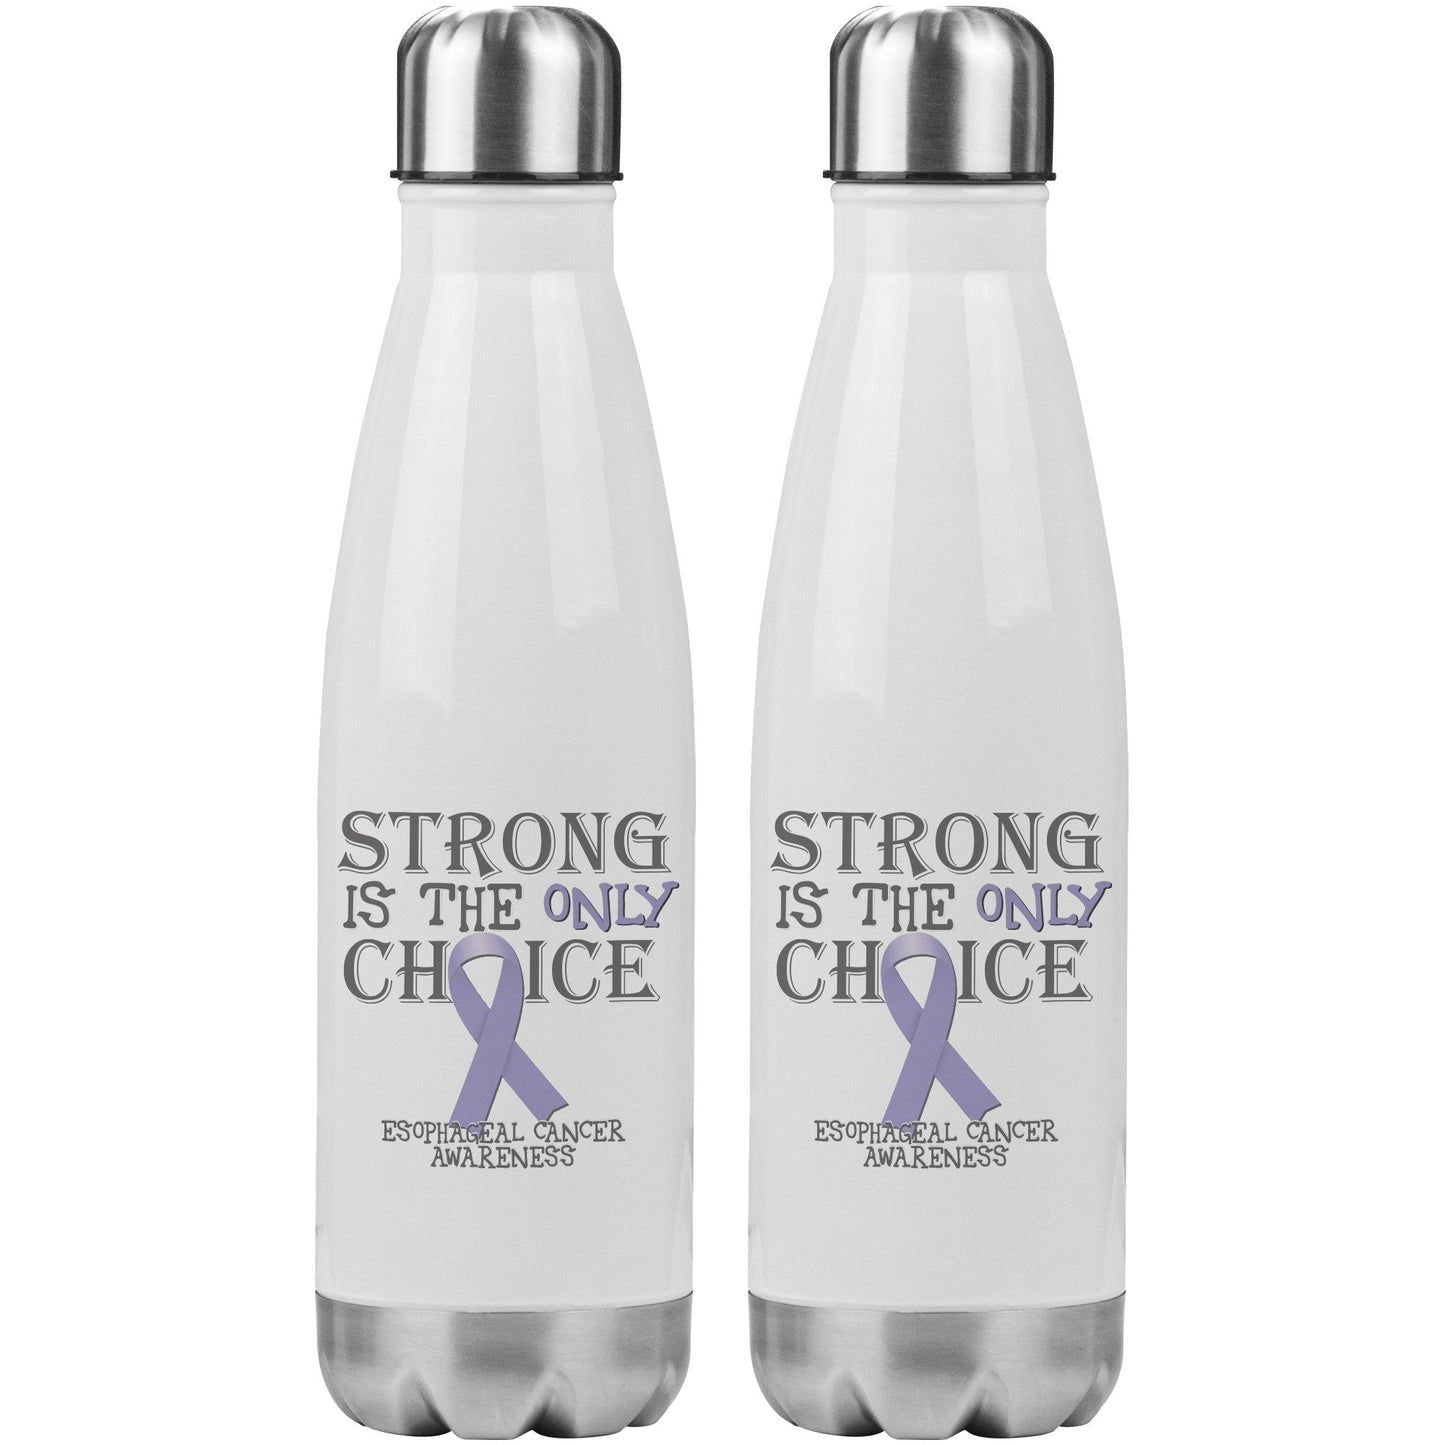 Strong is the Only Choice -Esophageal Cancer Awareness 20oz Insulated Water Bottle |x|